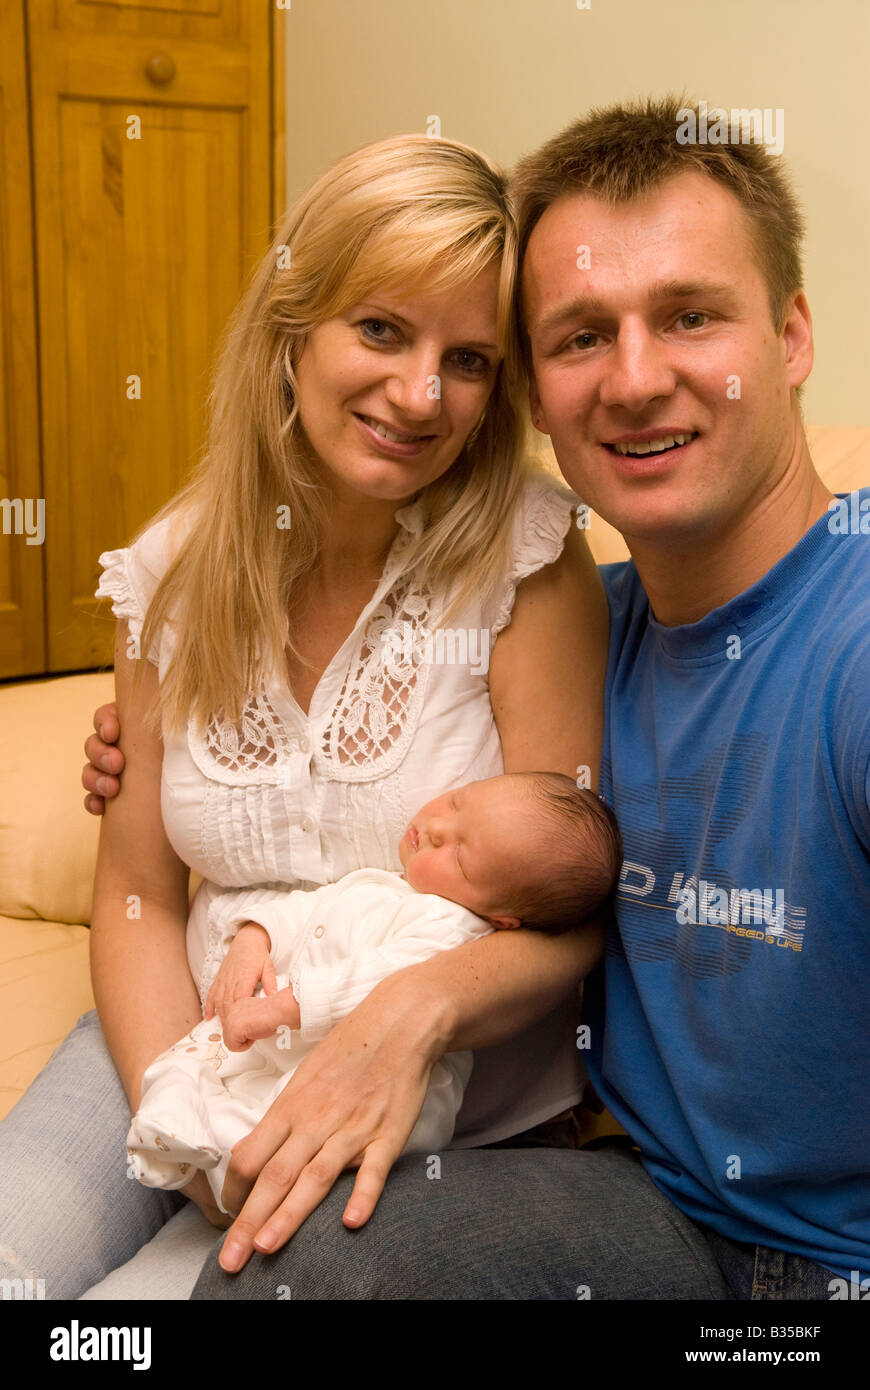 Polish woman [38 years] with her Polish partner [34 years] and 4 day old baby girl, Feltham, Middlesex UK Stock Photo